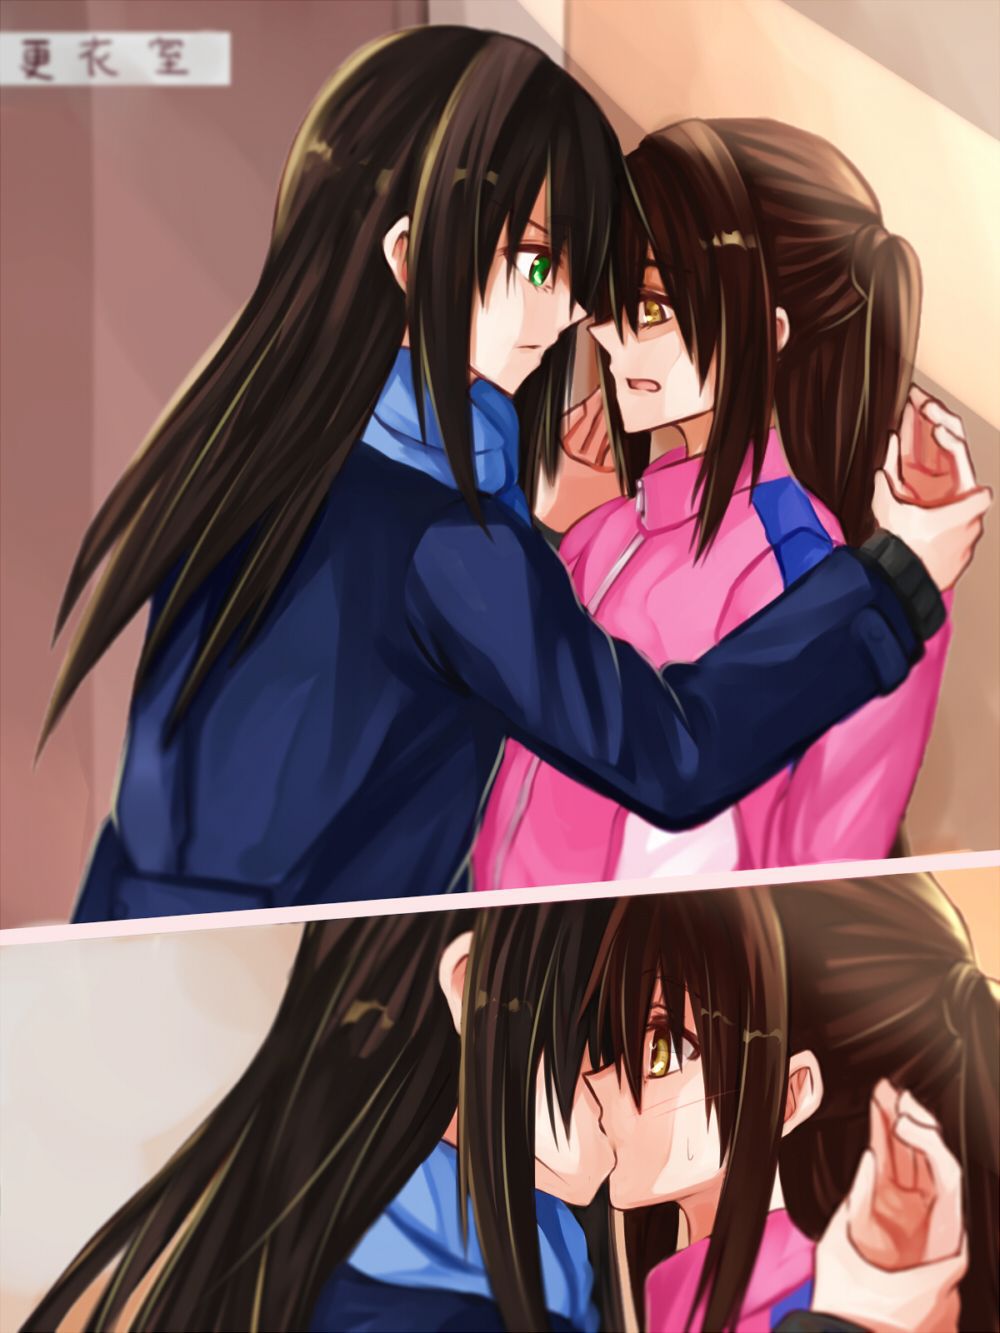 [Secondary-ZIP: Yuri lesbian image, or see other girls doing naughty things. 12